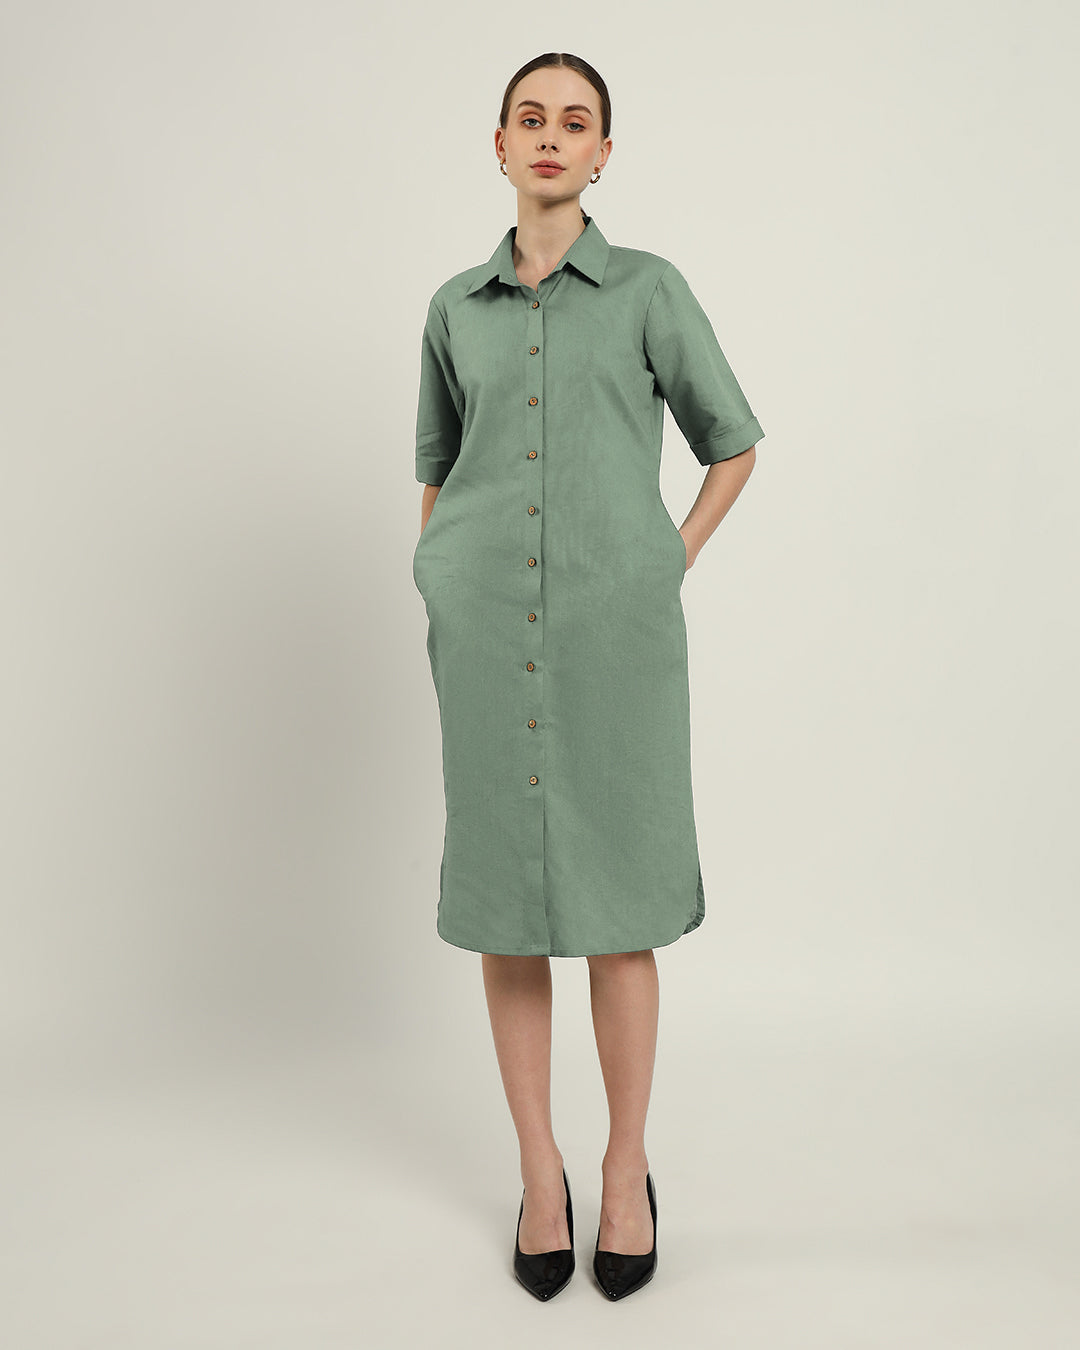 The Tampa Mint Cotton Dress